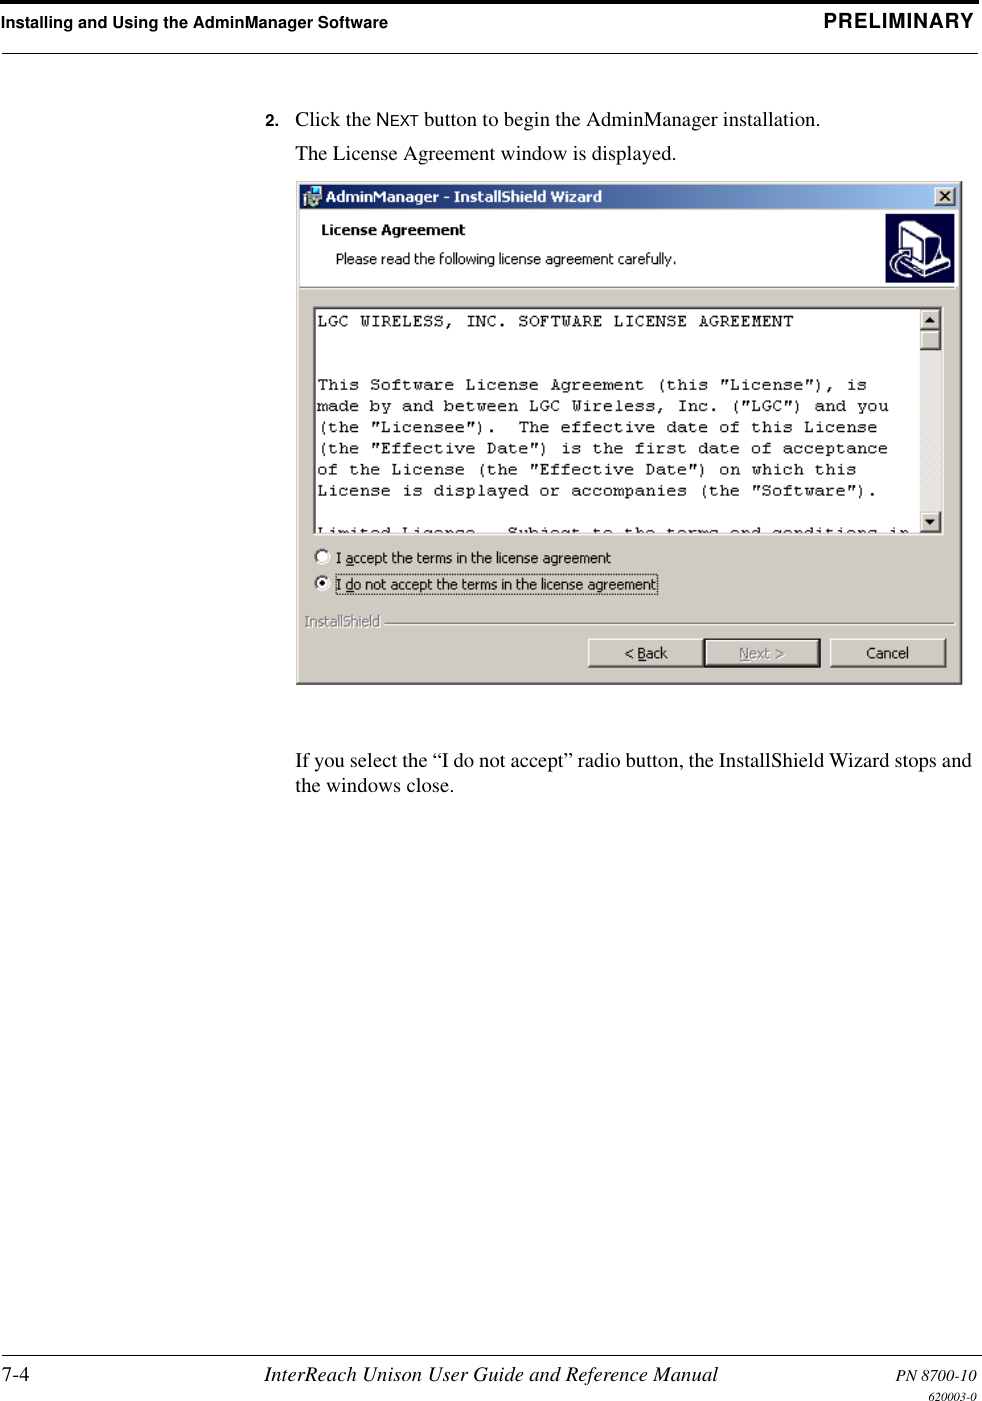 Installing and Using the AdminManager Software PRELIMINARY7-4 InterReach Unison User Guide and Reference Manual PN 8700-10620003-02. Click the NEXT button to begin the AdminManager installation.The License Agreement window is displayed.If you select the “I do not accept” radio button, the InstallShield Wizard stops and the windows close.